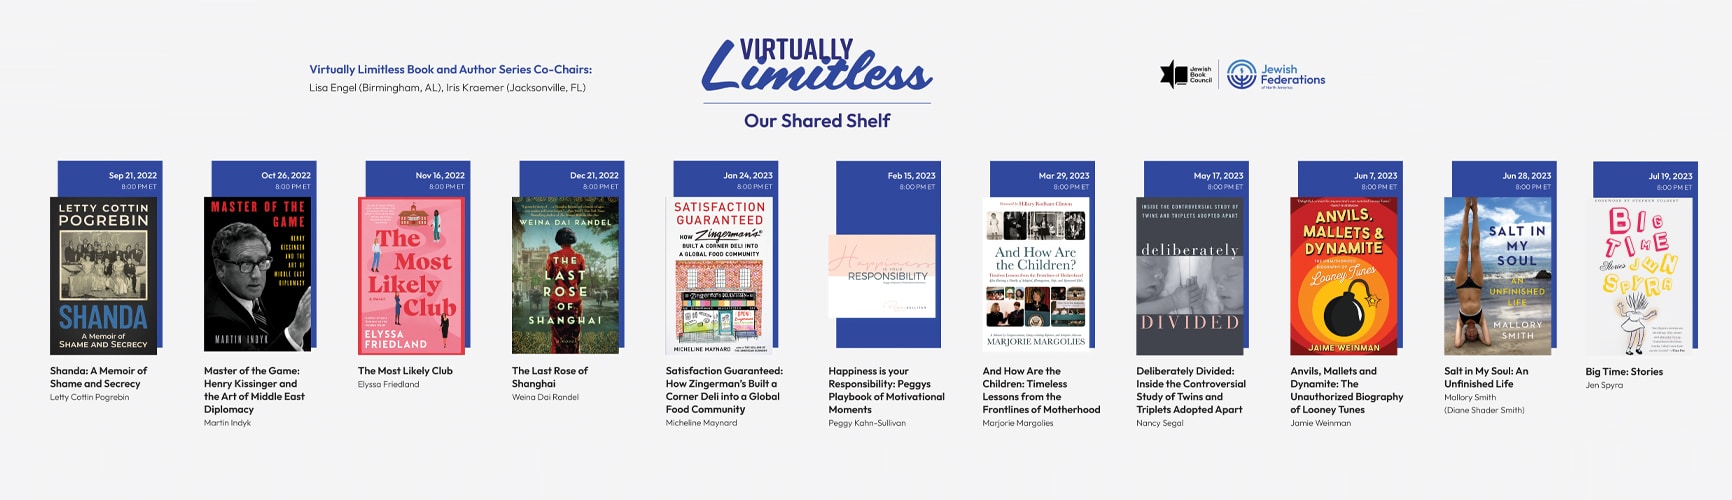 Virtually Limitless: Our Shared Shelf Book and Author Series 3 - virtually limitless3